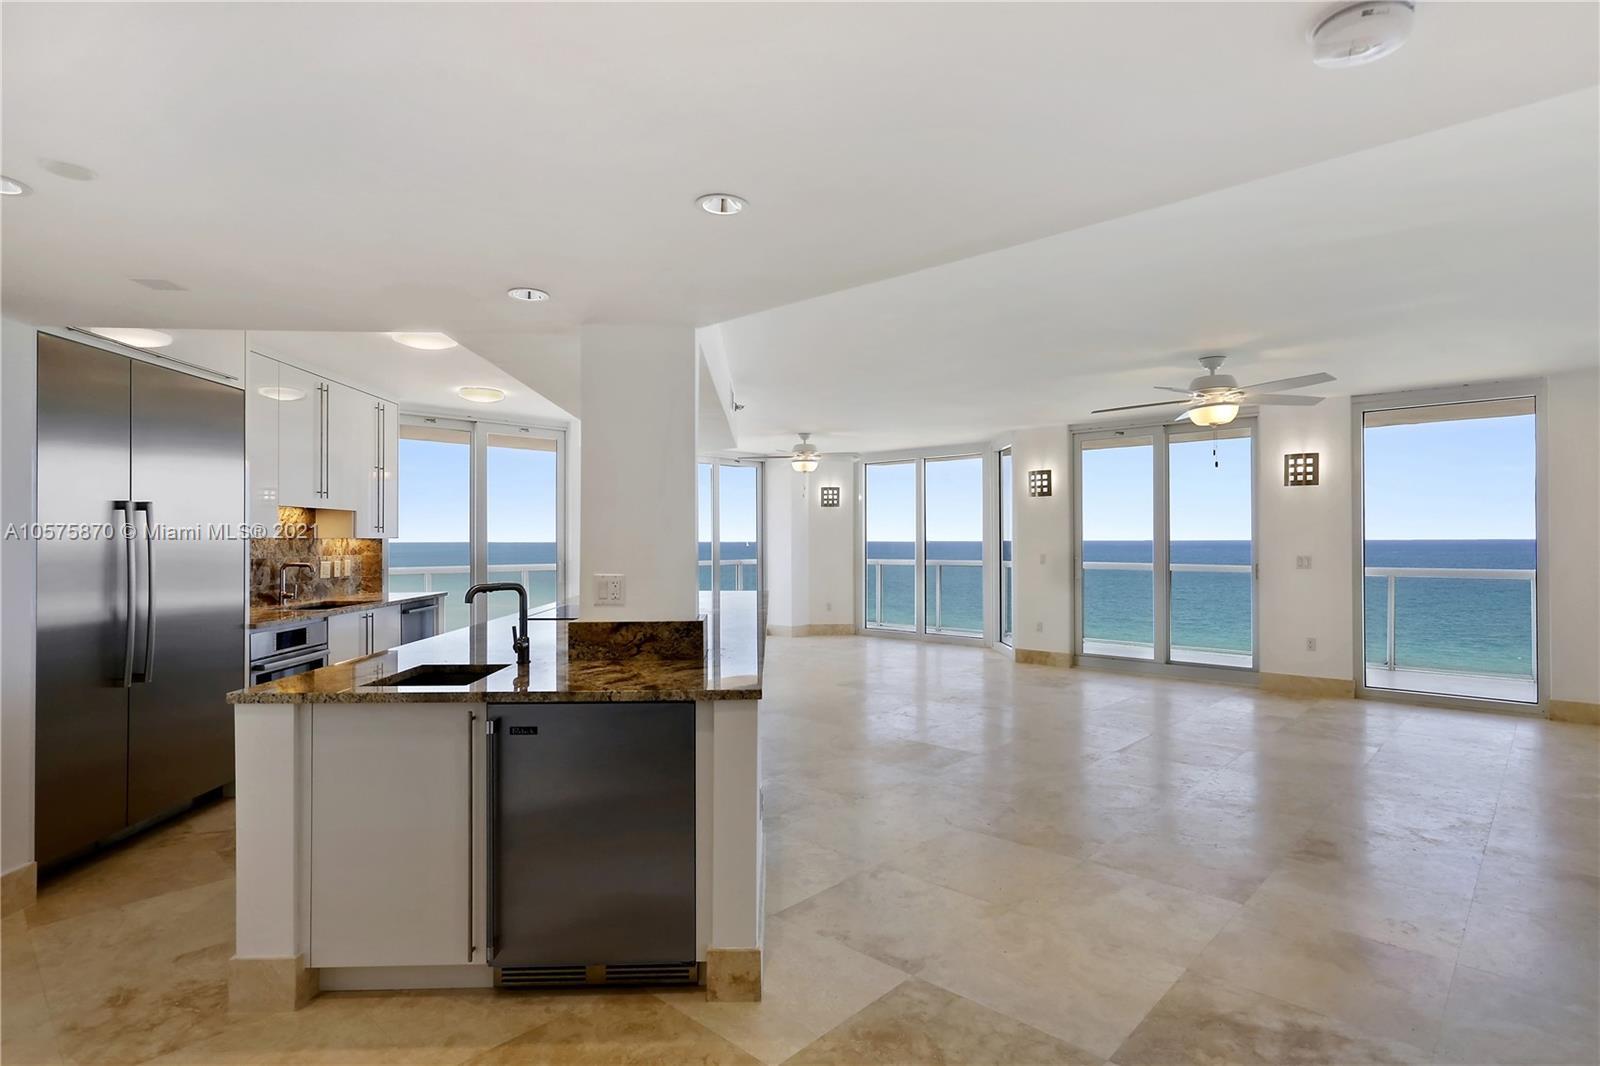 Magnificent 2BR/2.5BA split floor plan with panoramic, direct ocean views! Every inch of this 1,690S